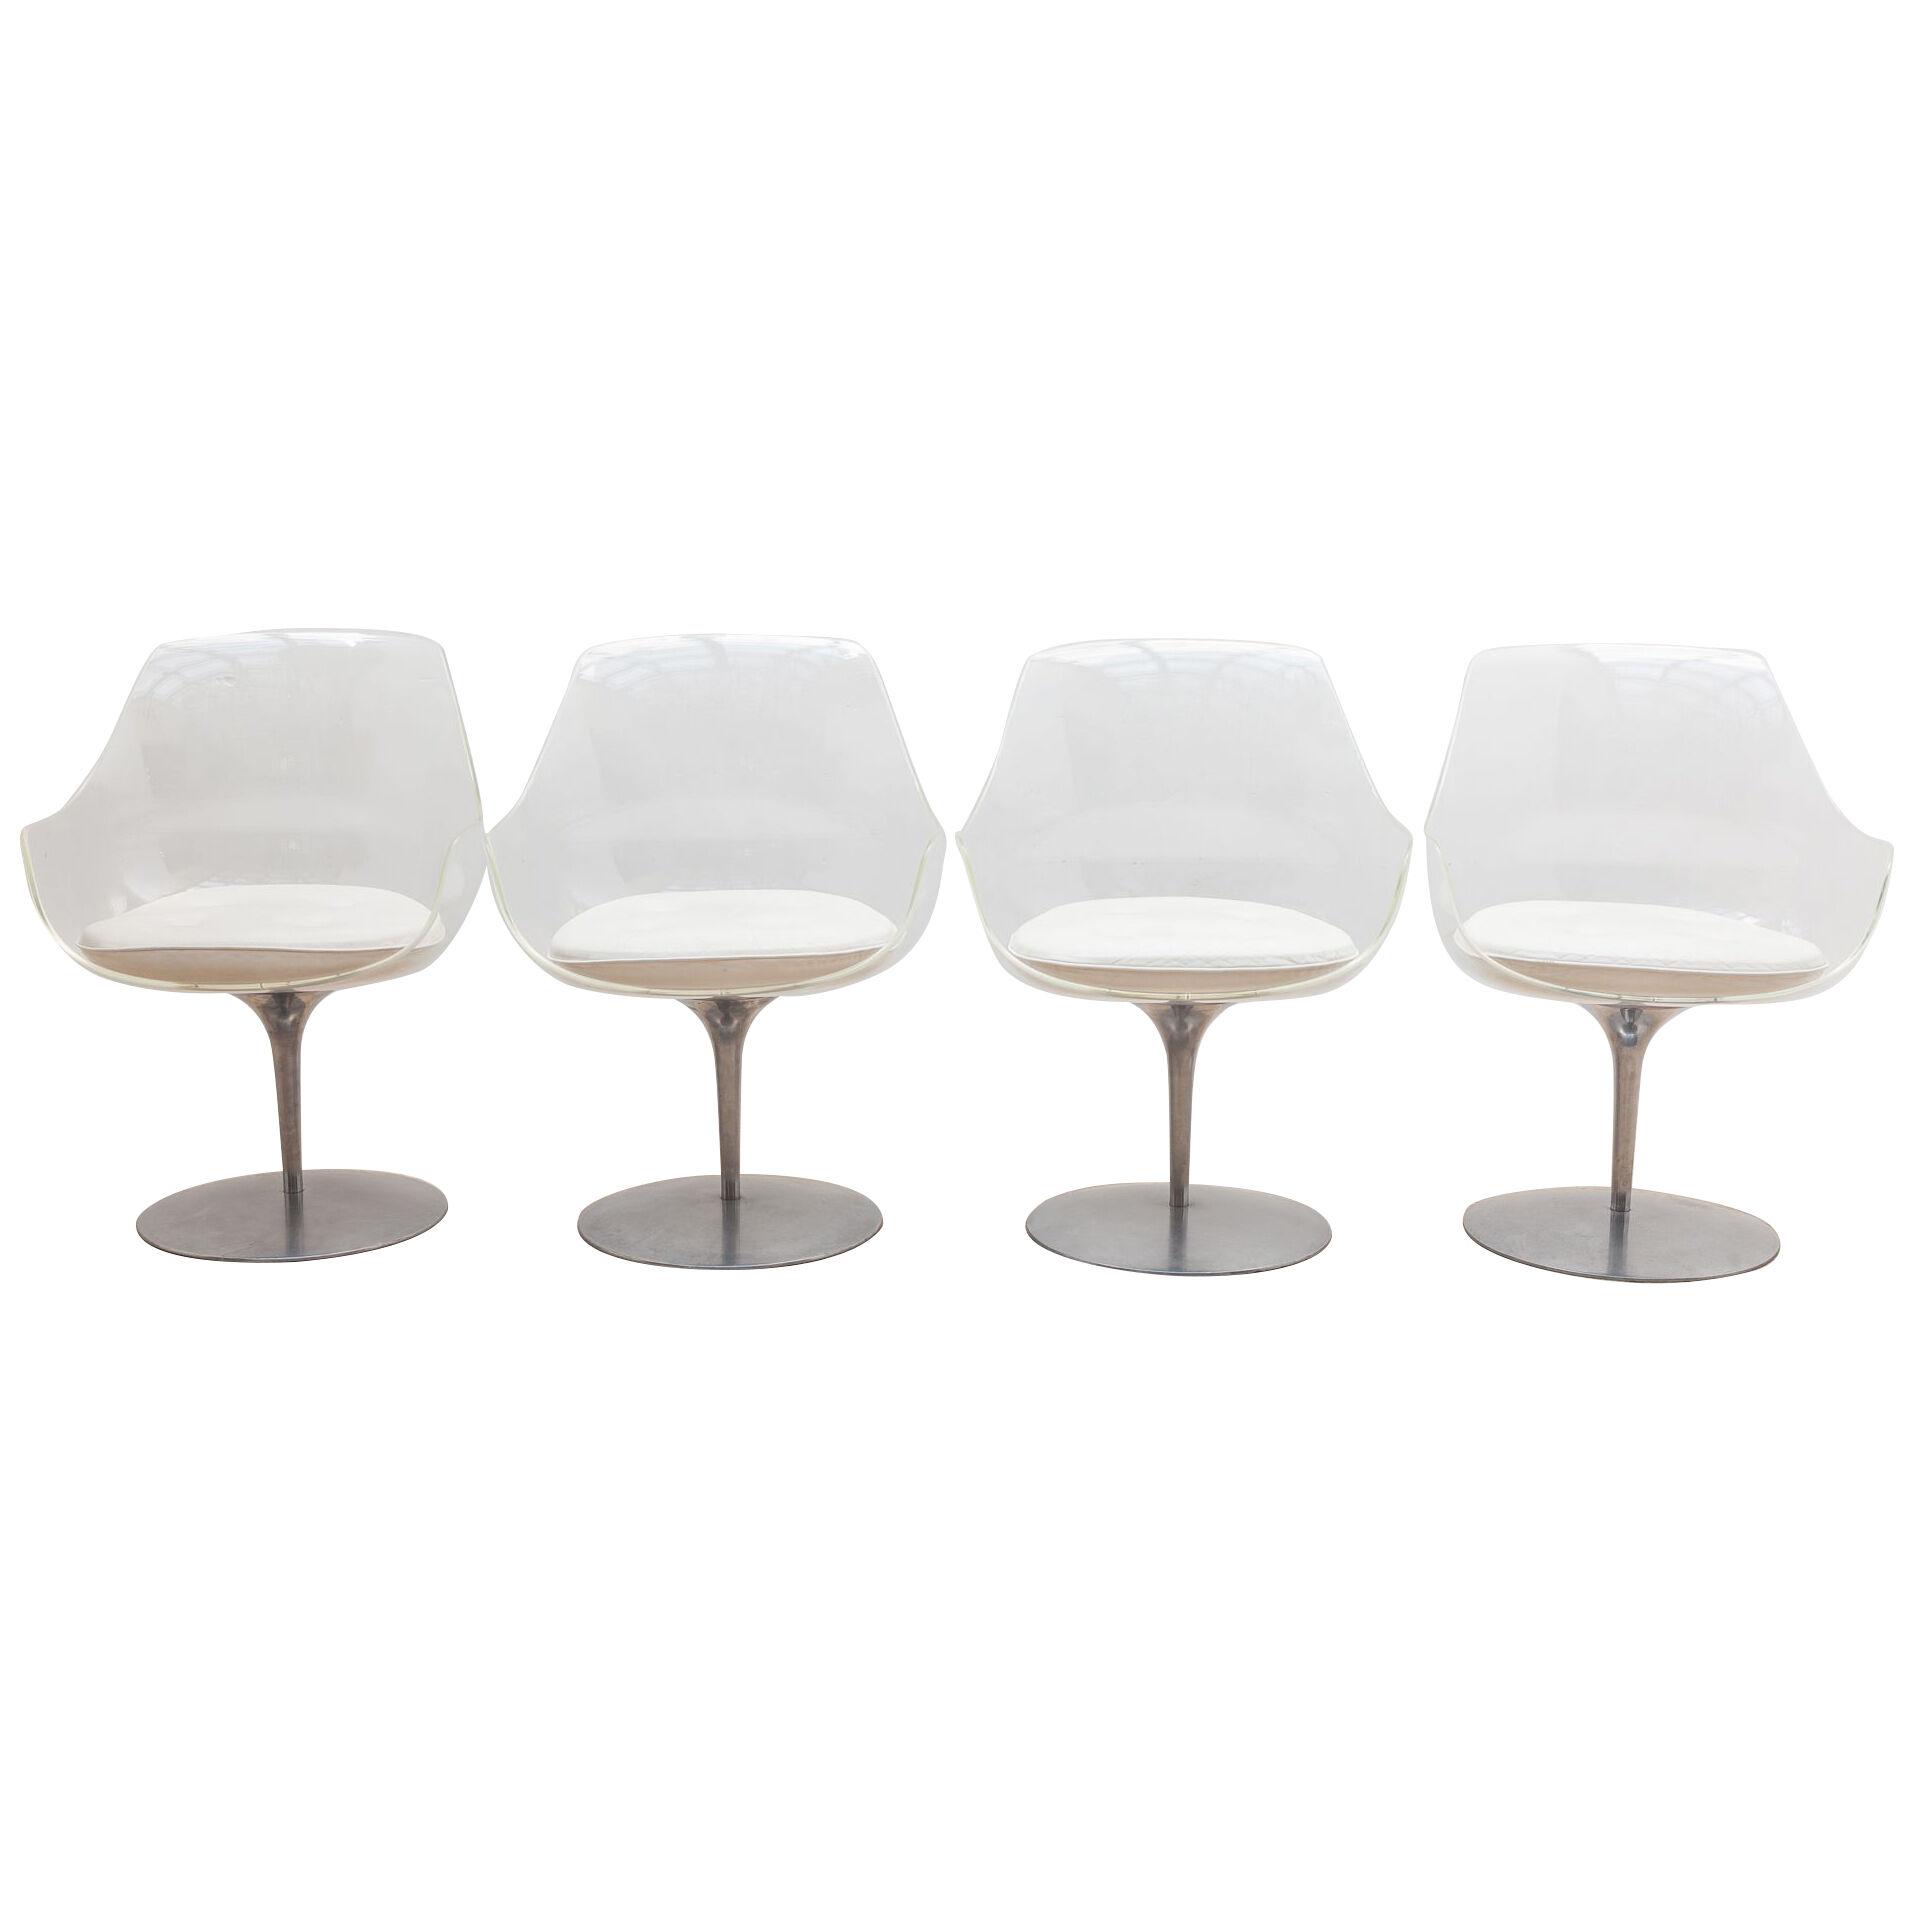 "Invisible Series" Set of Four Translucent Lucite Swivel Chairs by Laverne